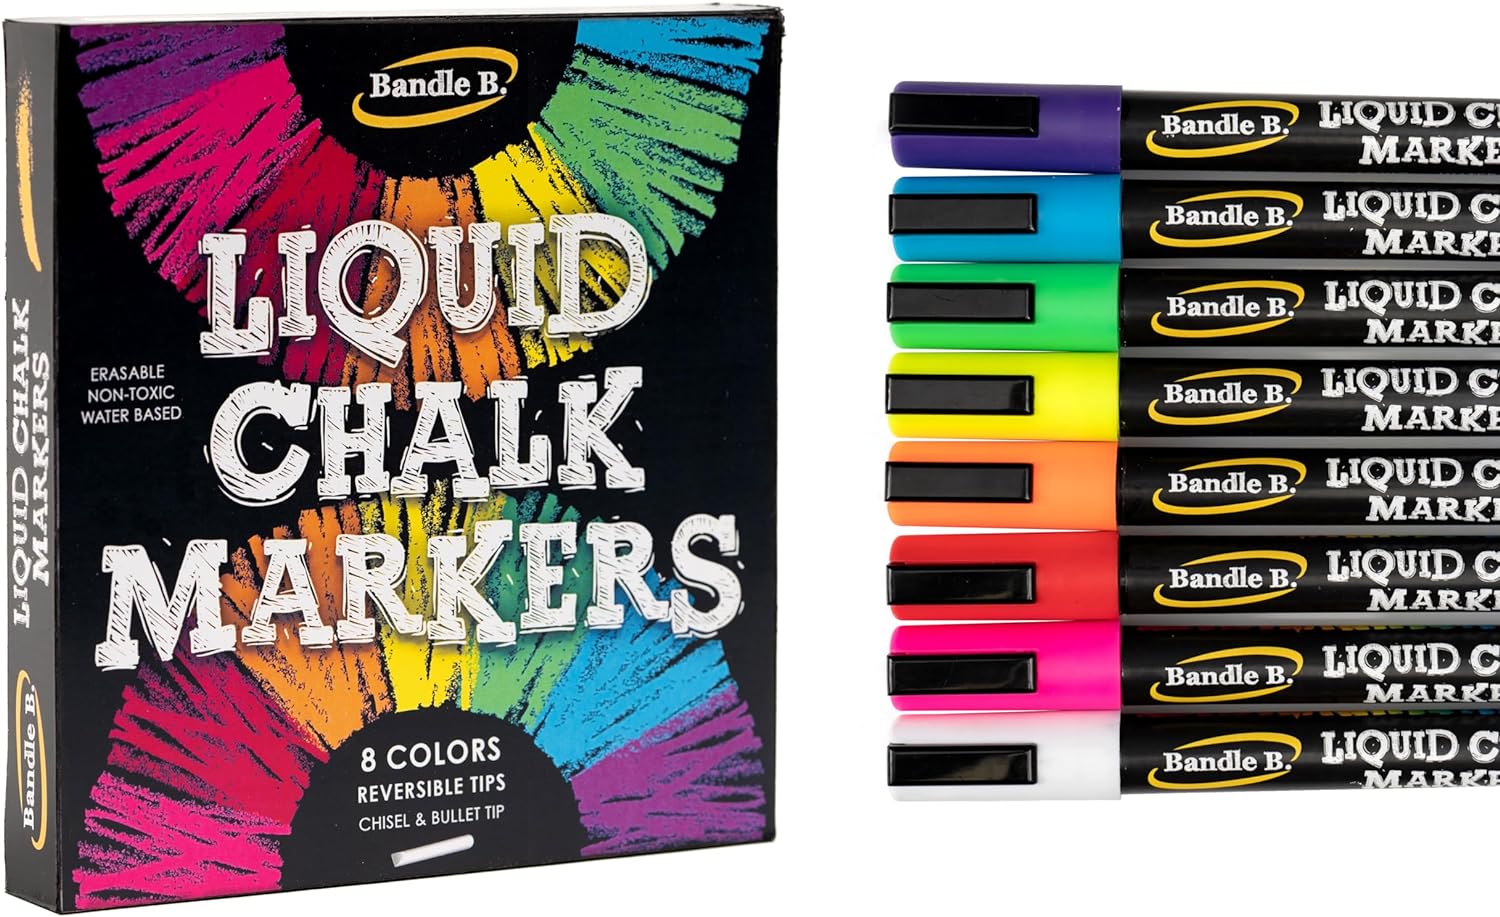 Bandle B. Chalk Markers - 8 Vibrant, Erasable, Non-Toxic, Water-Based, Reversible Tips, For Kids & Adults